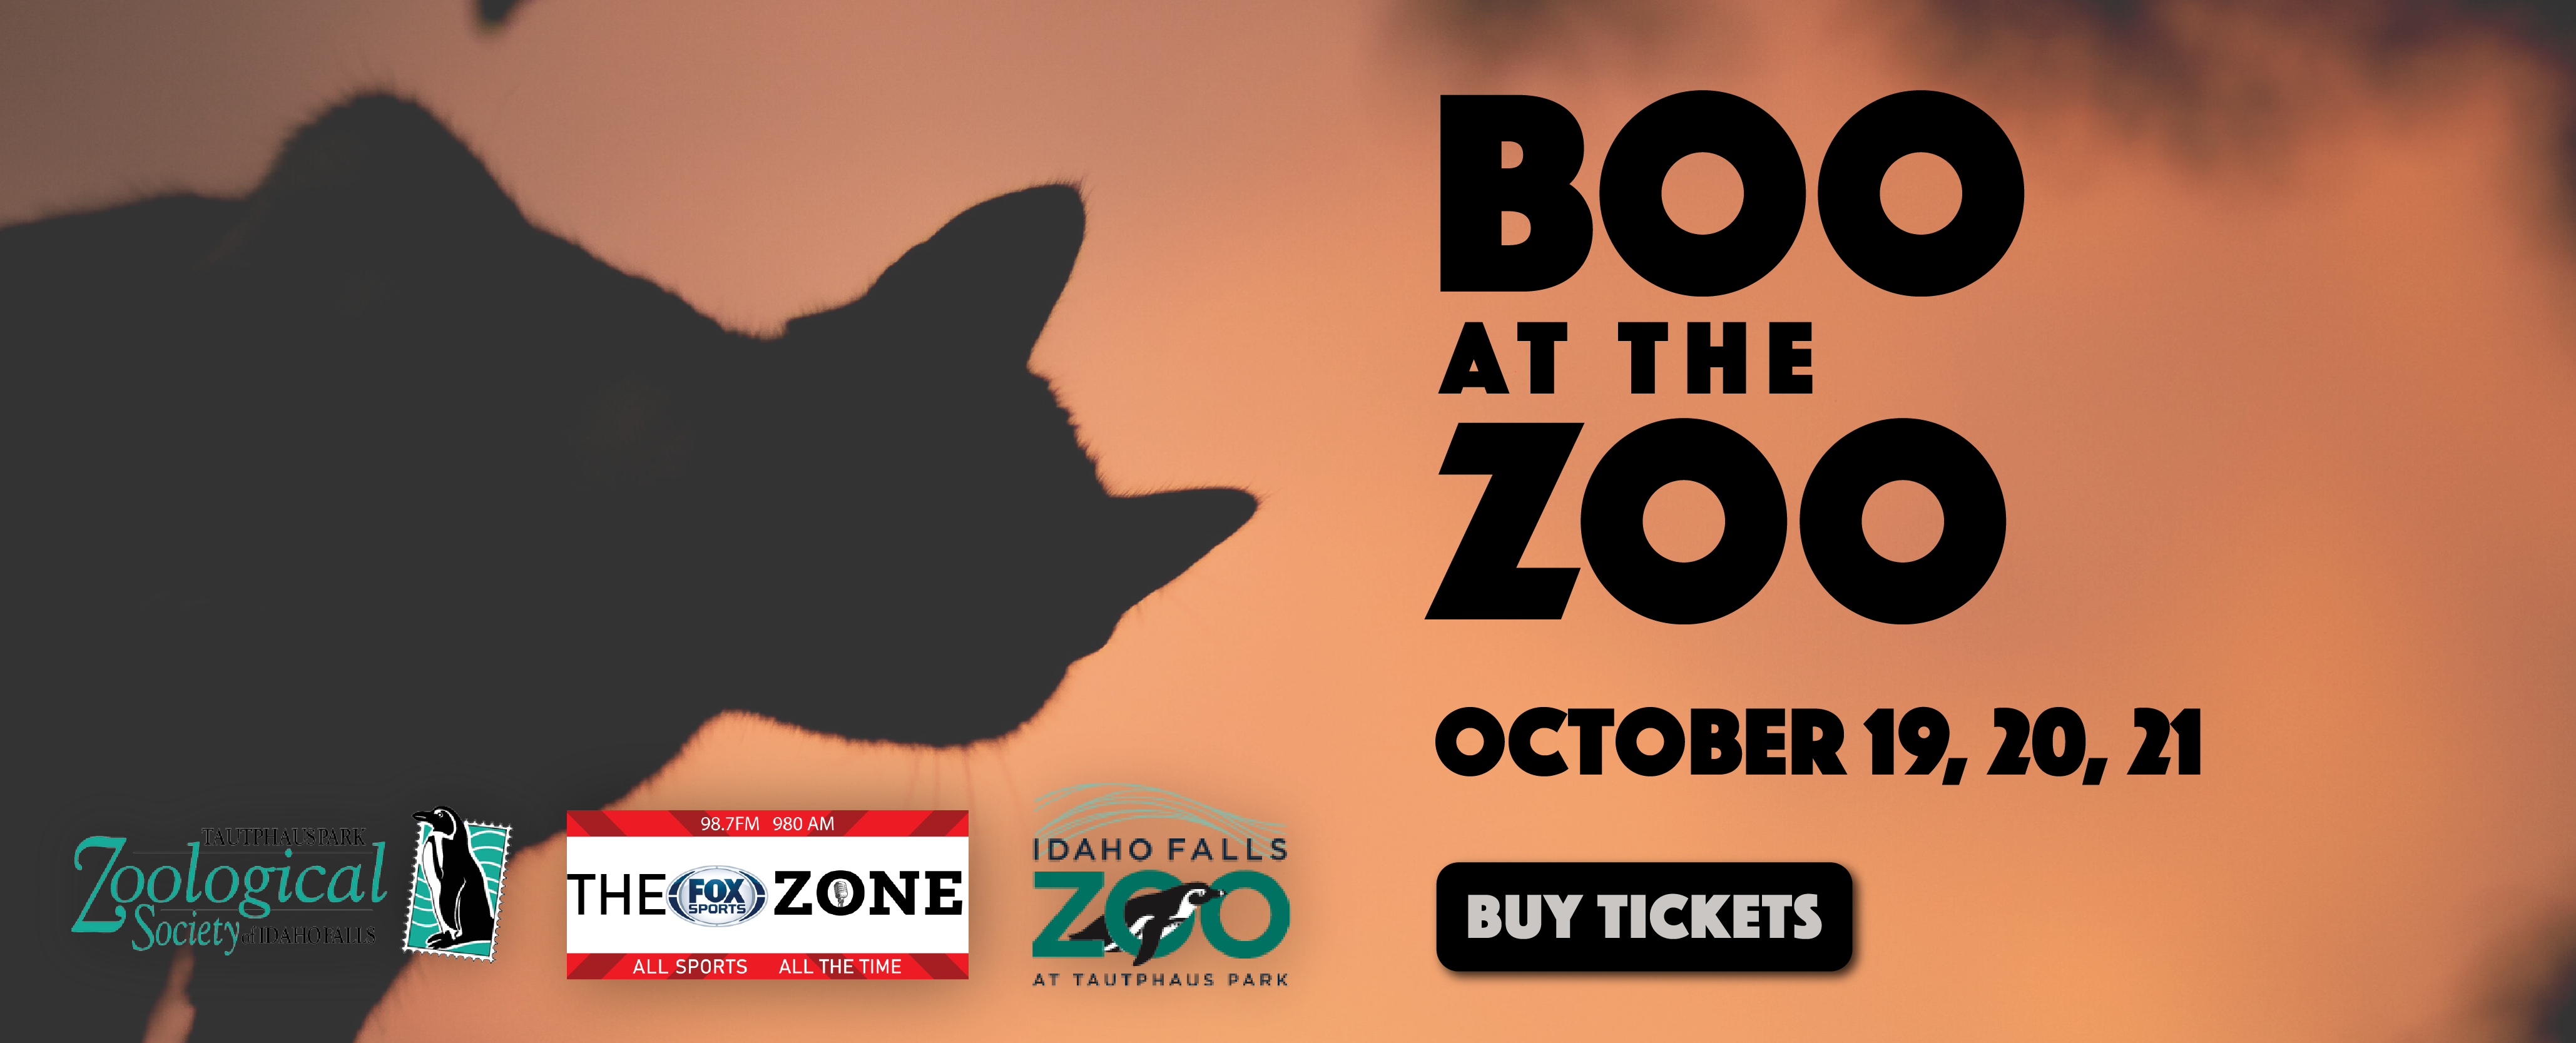 980thezone_boo_at_the_zoo_ad